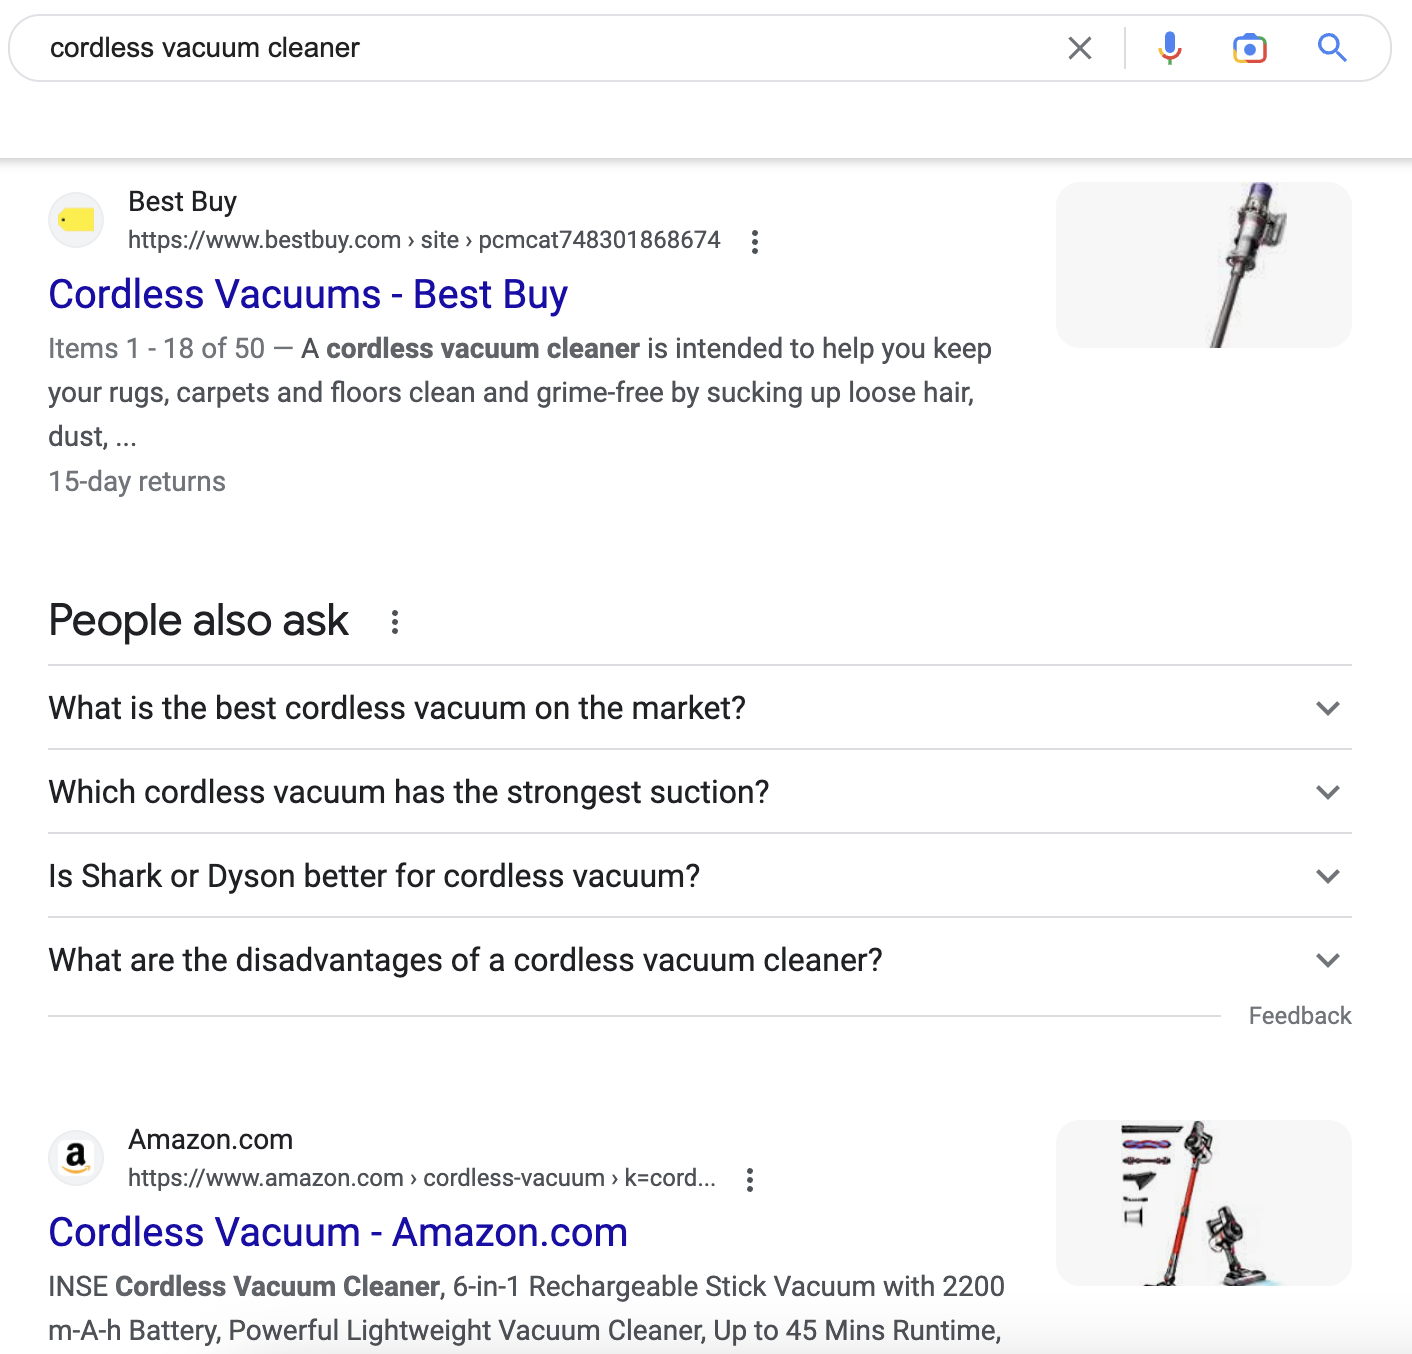 Search results for cordless vacuum cleaner on Google